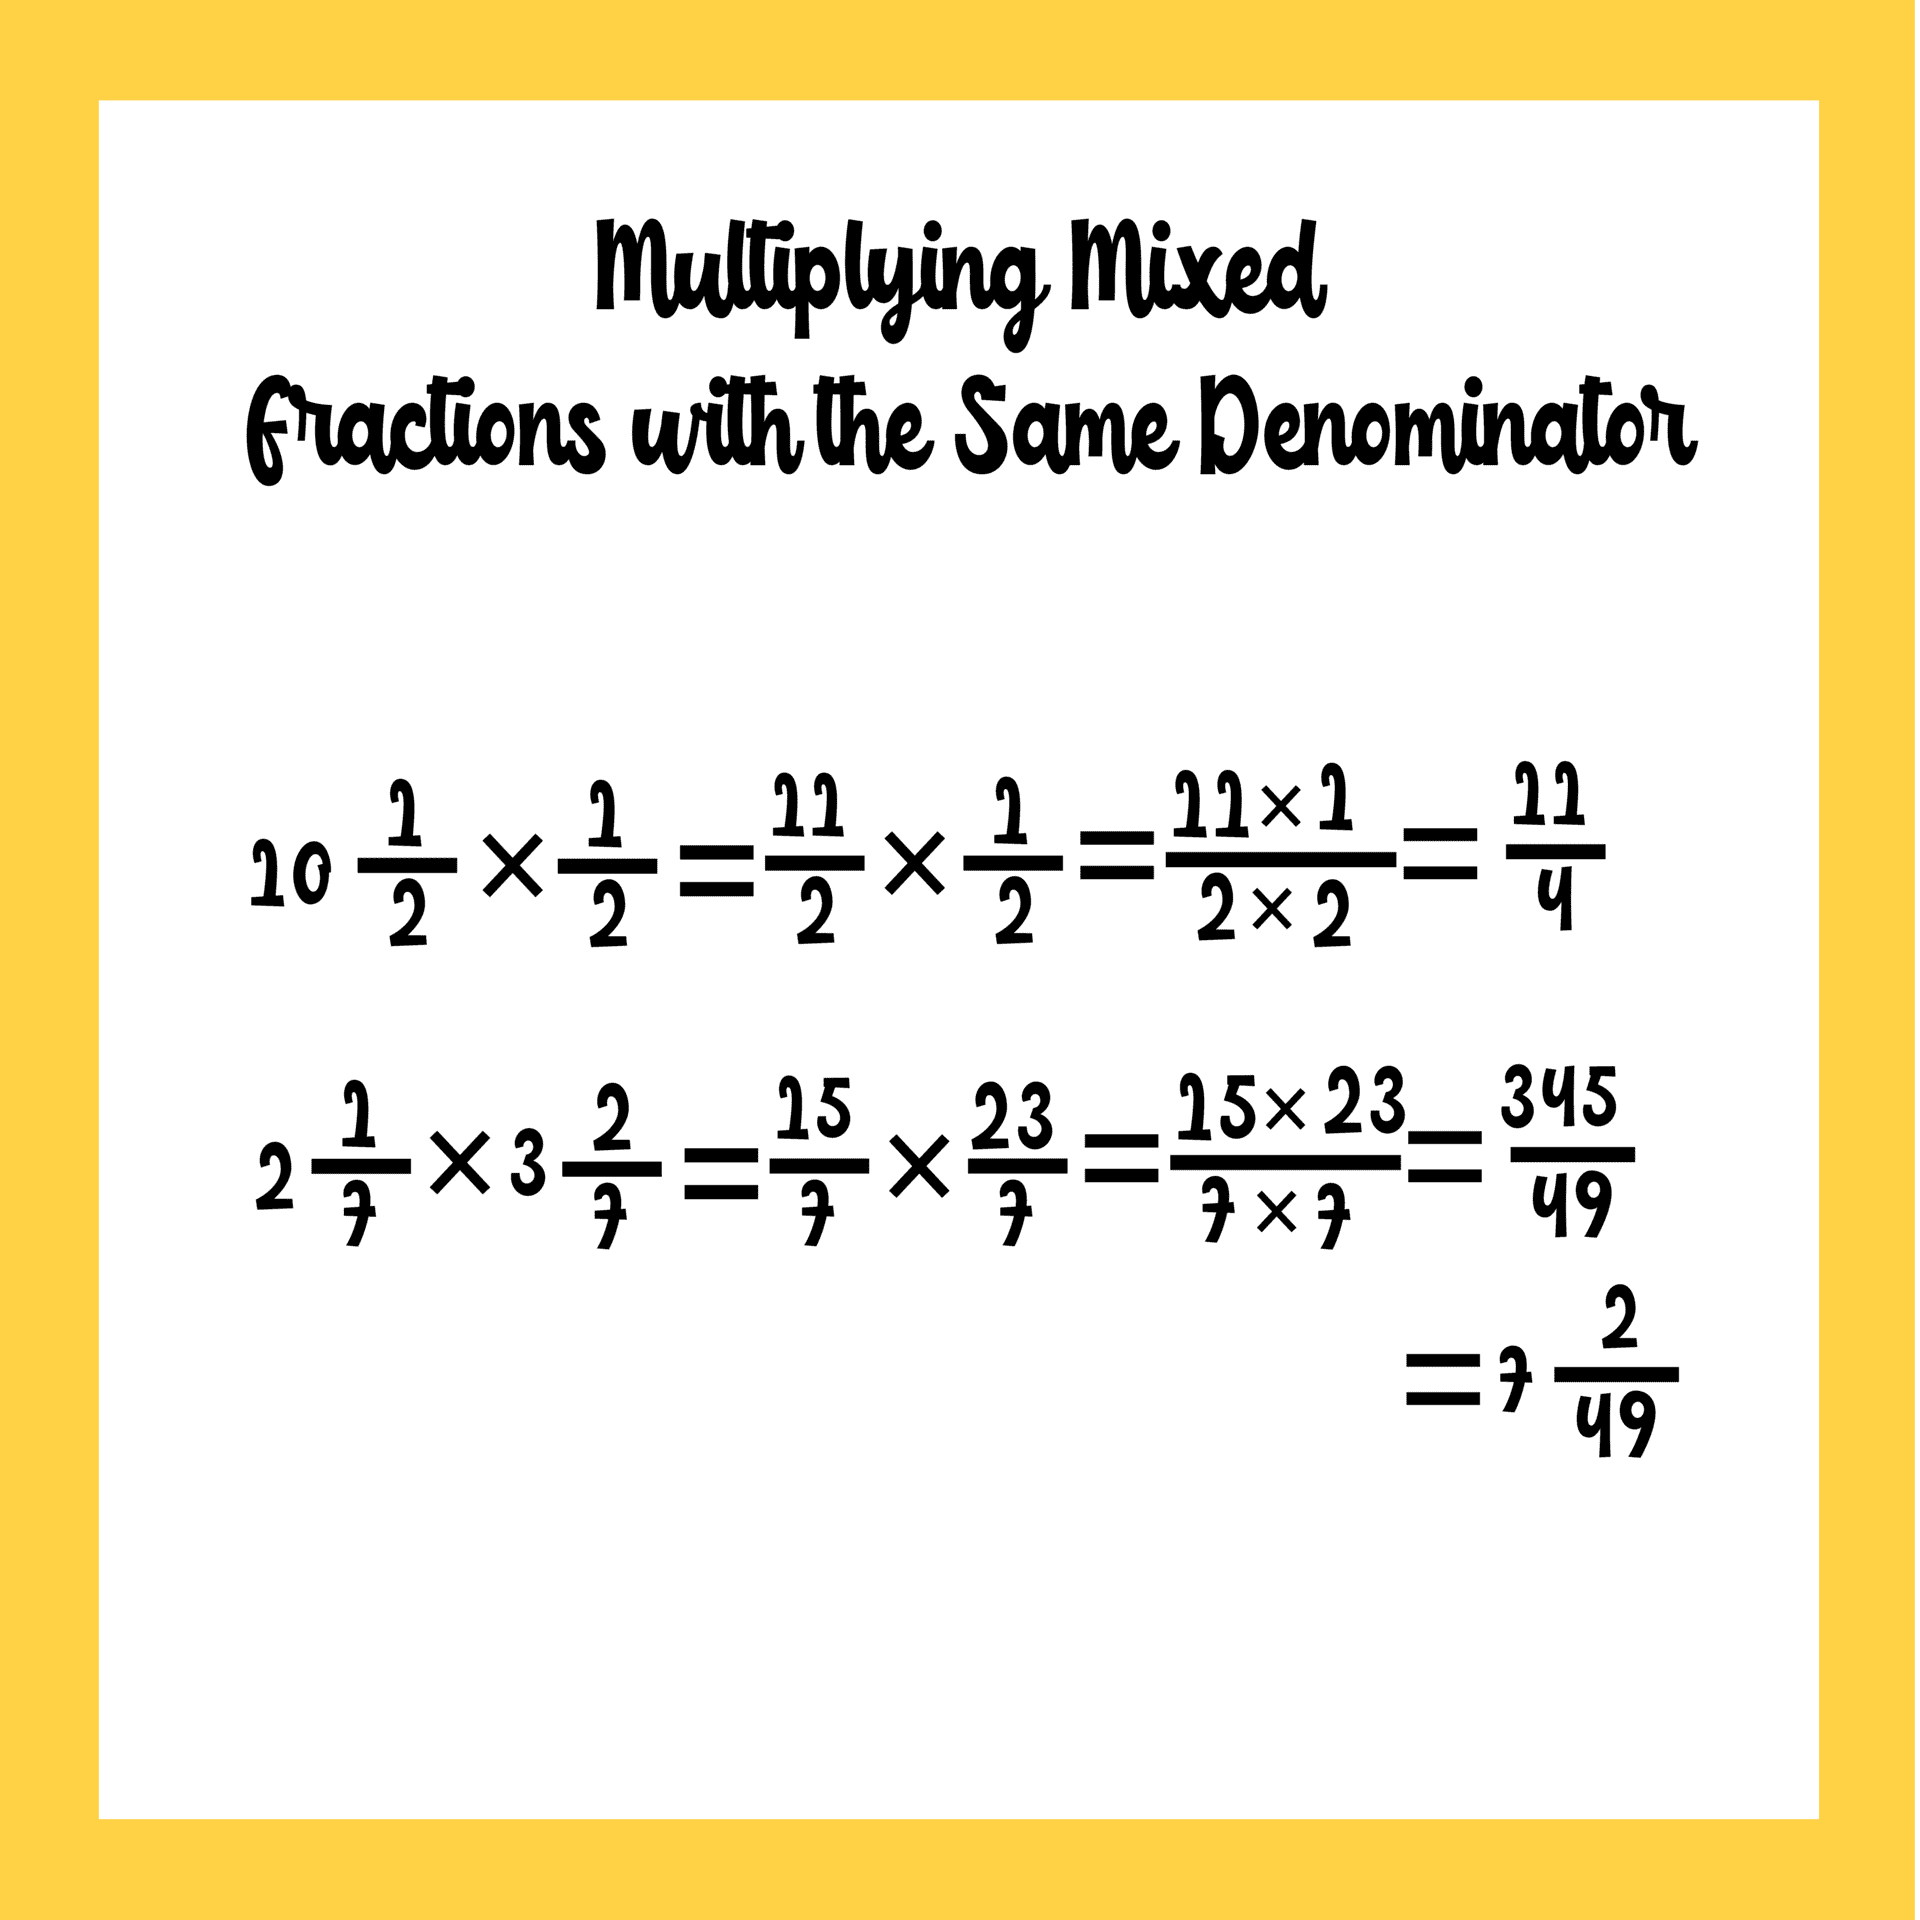 Using mixed fraction to describe Multiplying Fractions with Same Denominators Worksheets